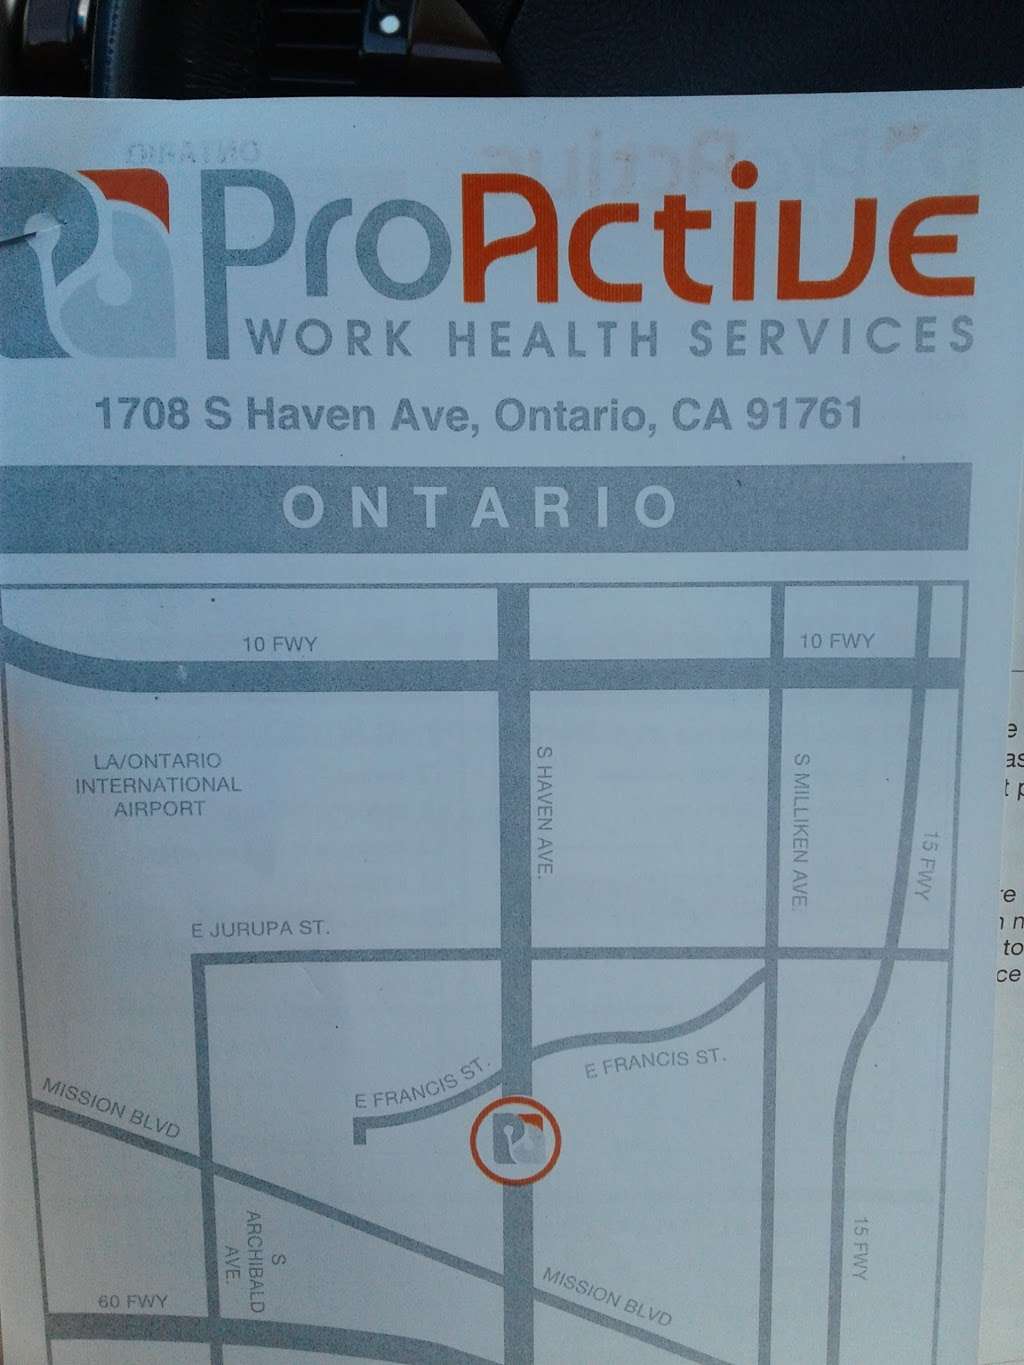 Proactive Work Health Services | 1801 Excise Ave Ste 108 Corner of Francis and, S Haven Ave, Ontario, CA 91761 | Phone: (909) 390-3400